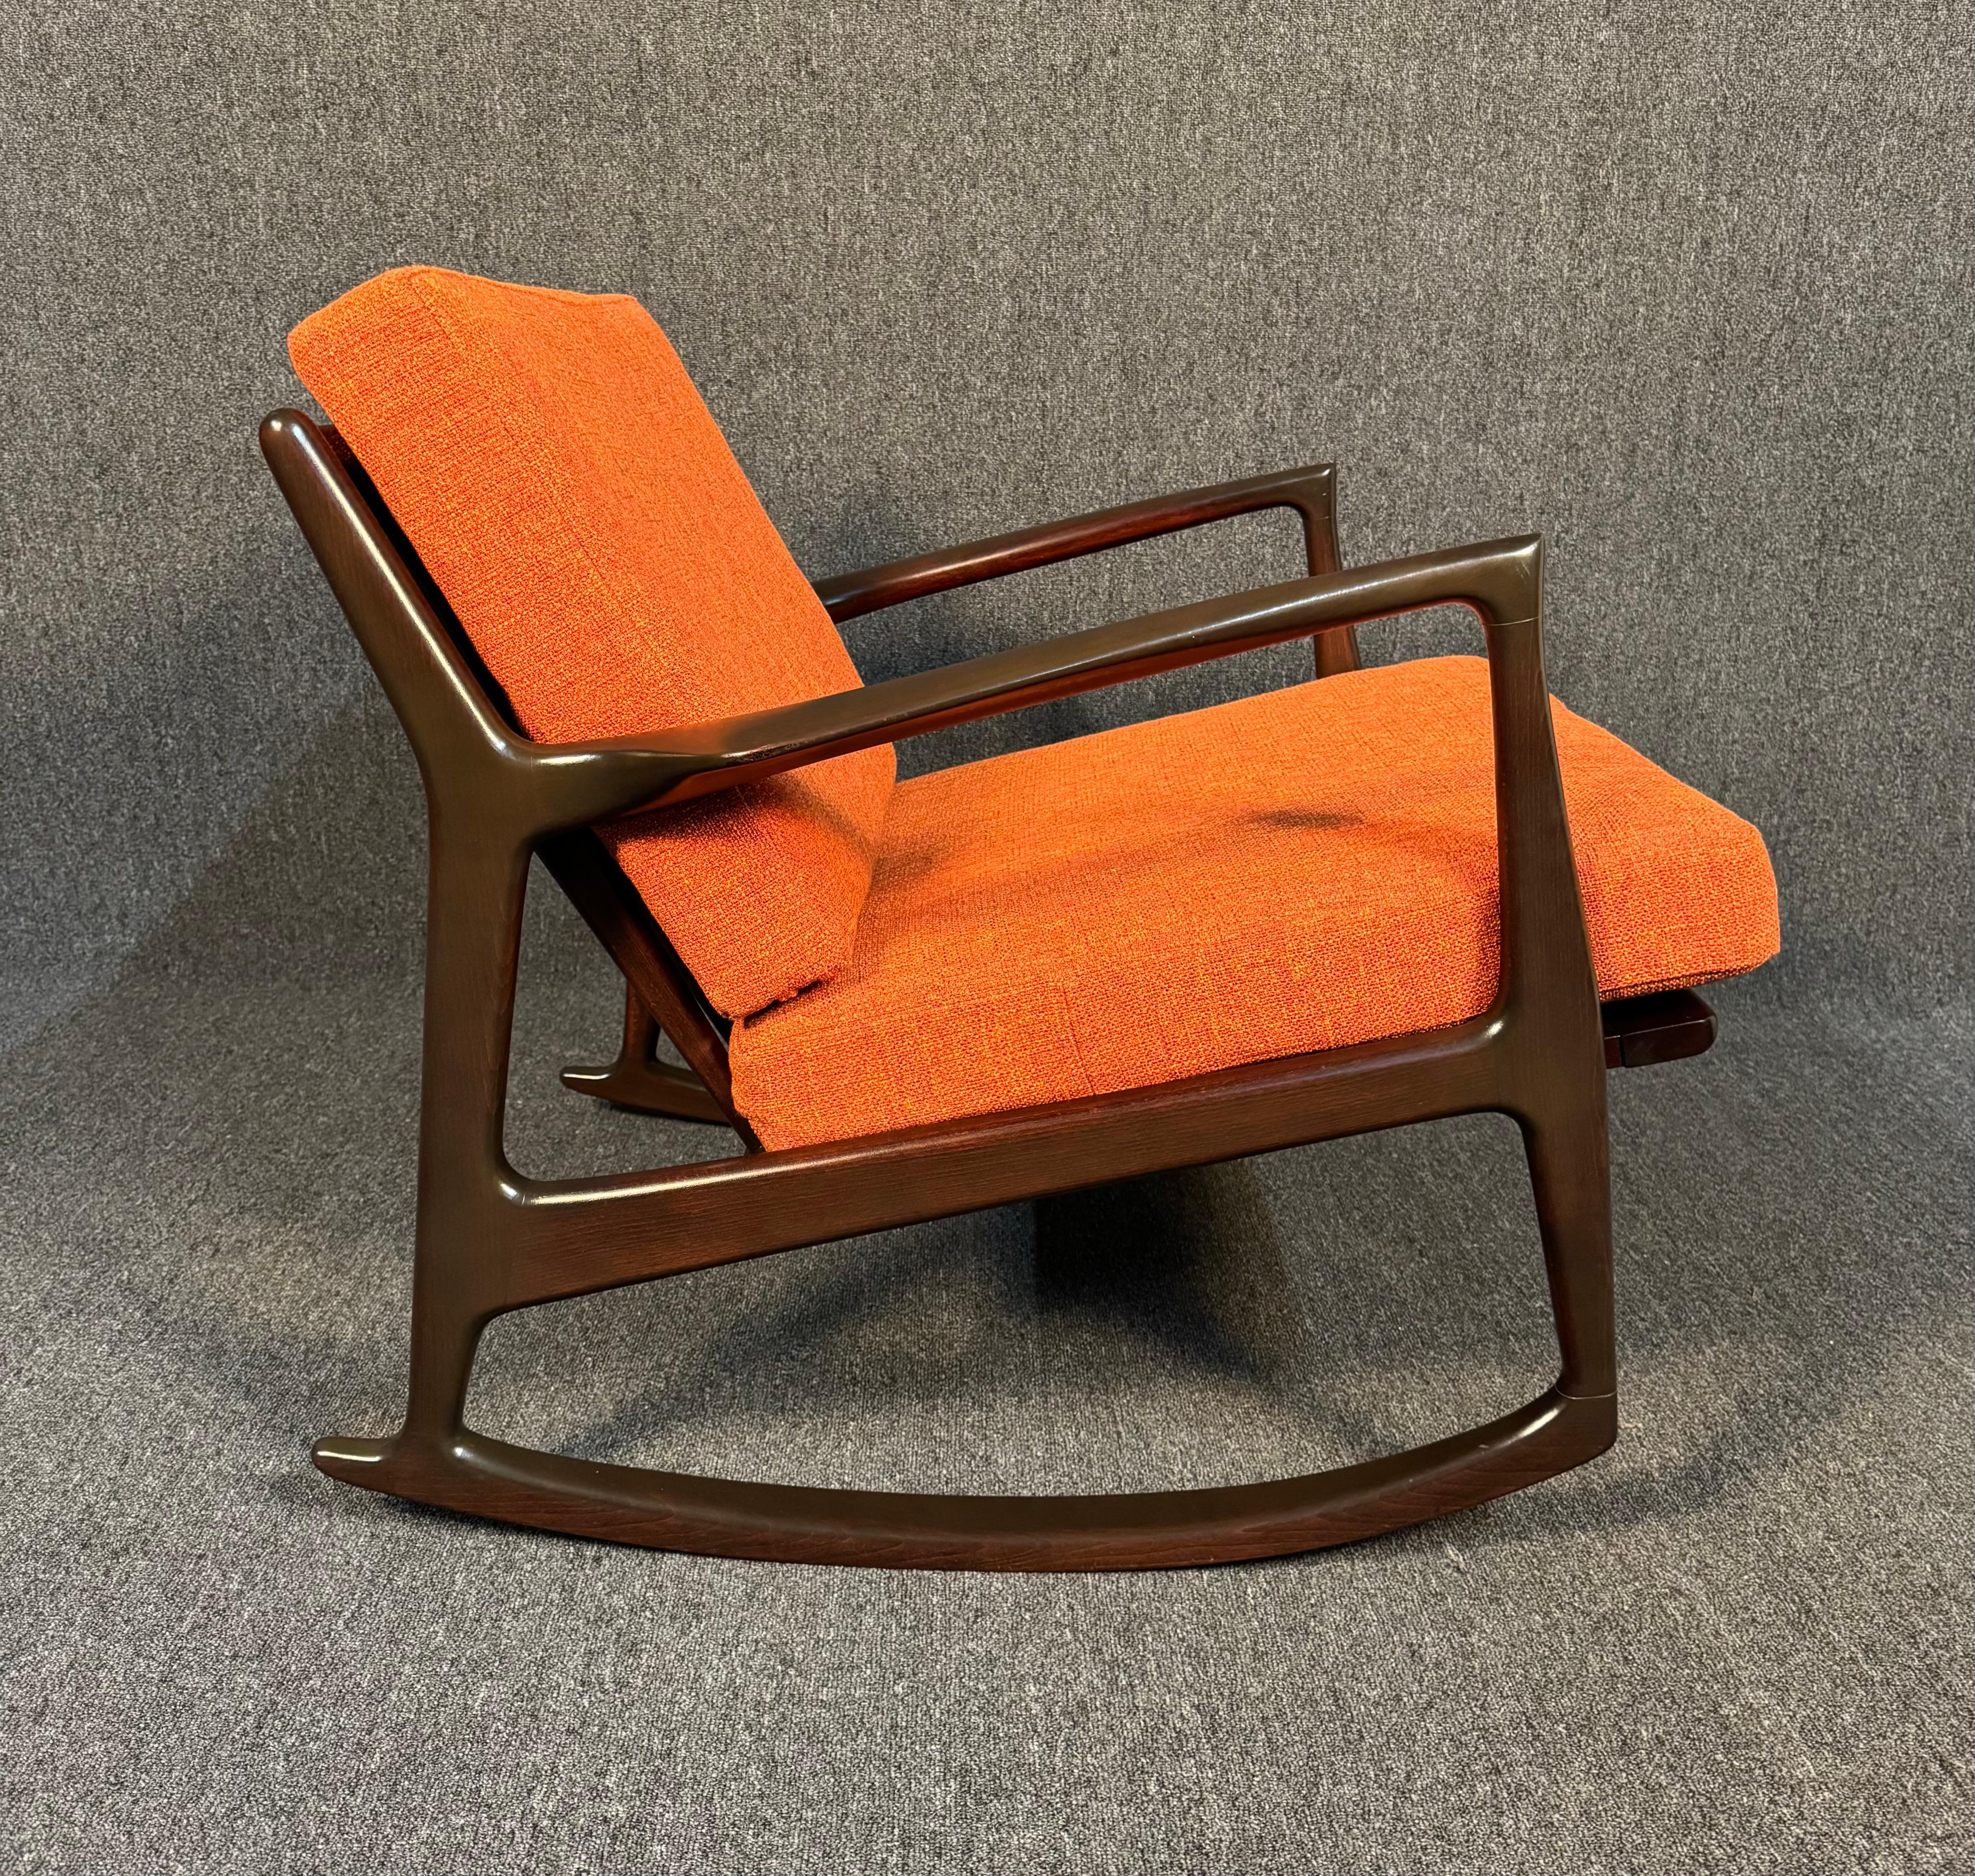 Beech Vintage Danish Mid Century Modern Rocking Chair by Kofod Larsen for Selig For Sale